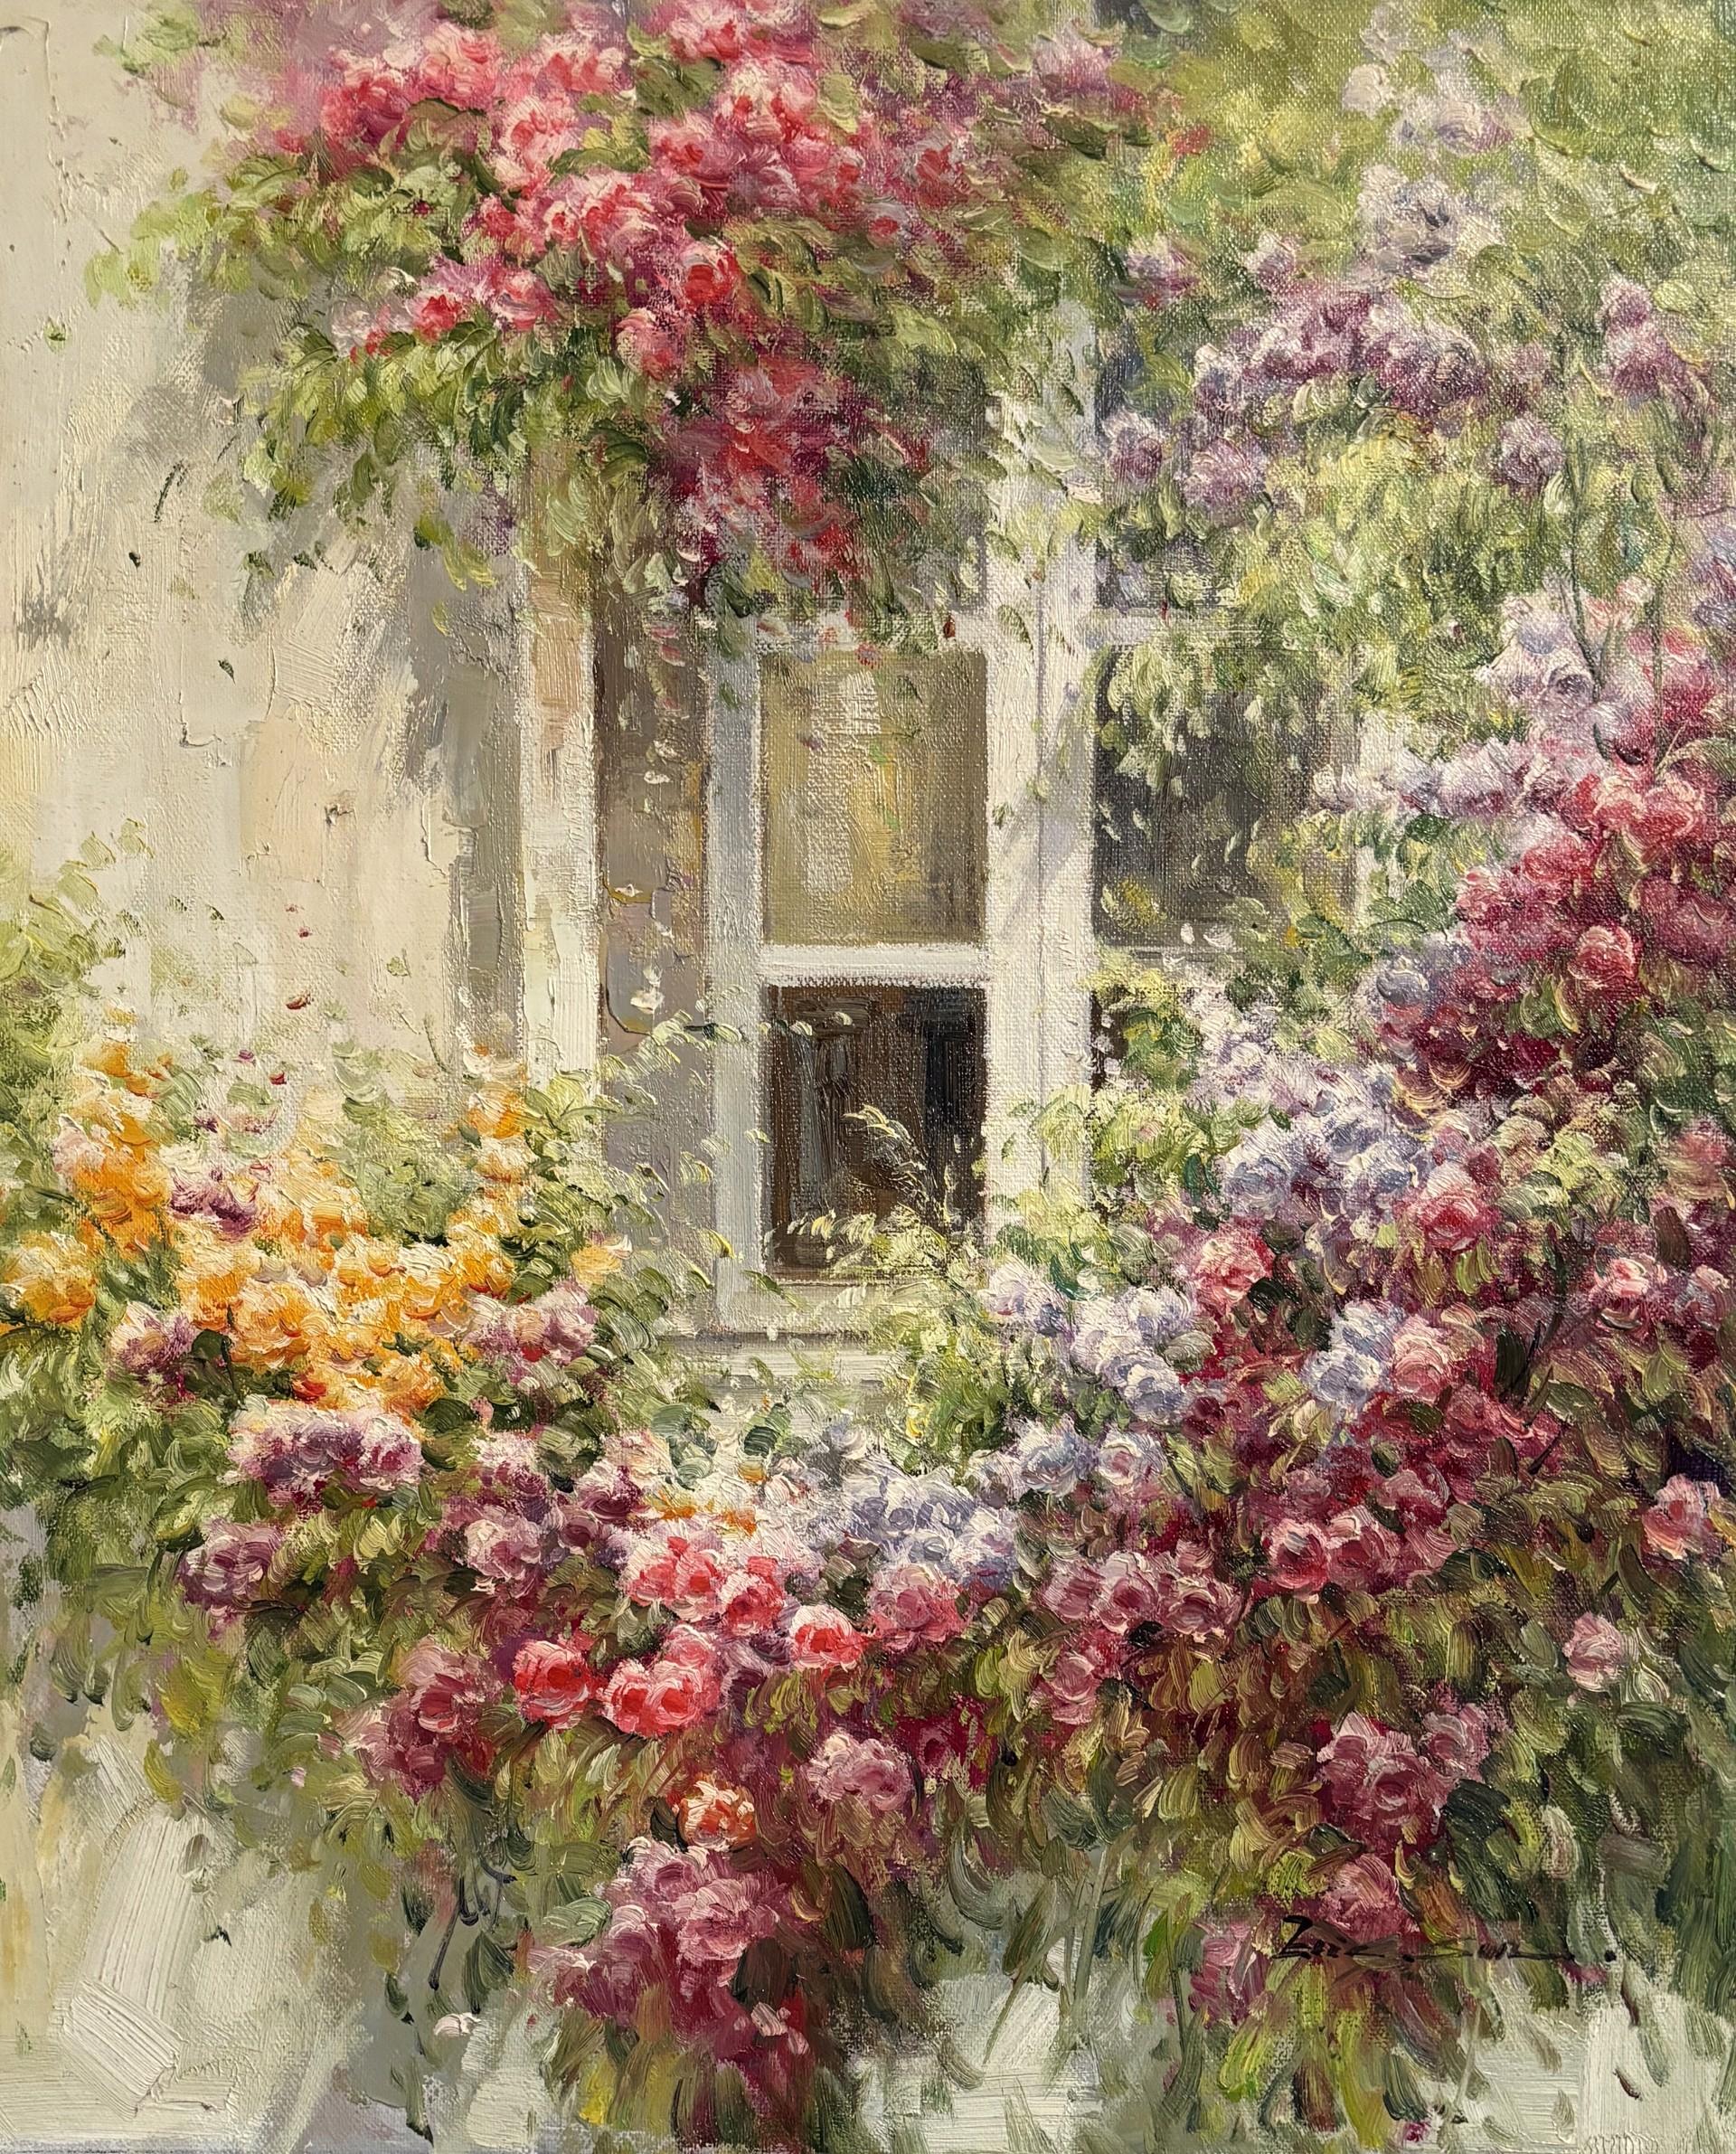 WINDOW VIEW OF FLOWERS by ERIC SUN